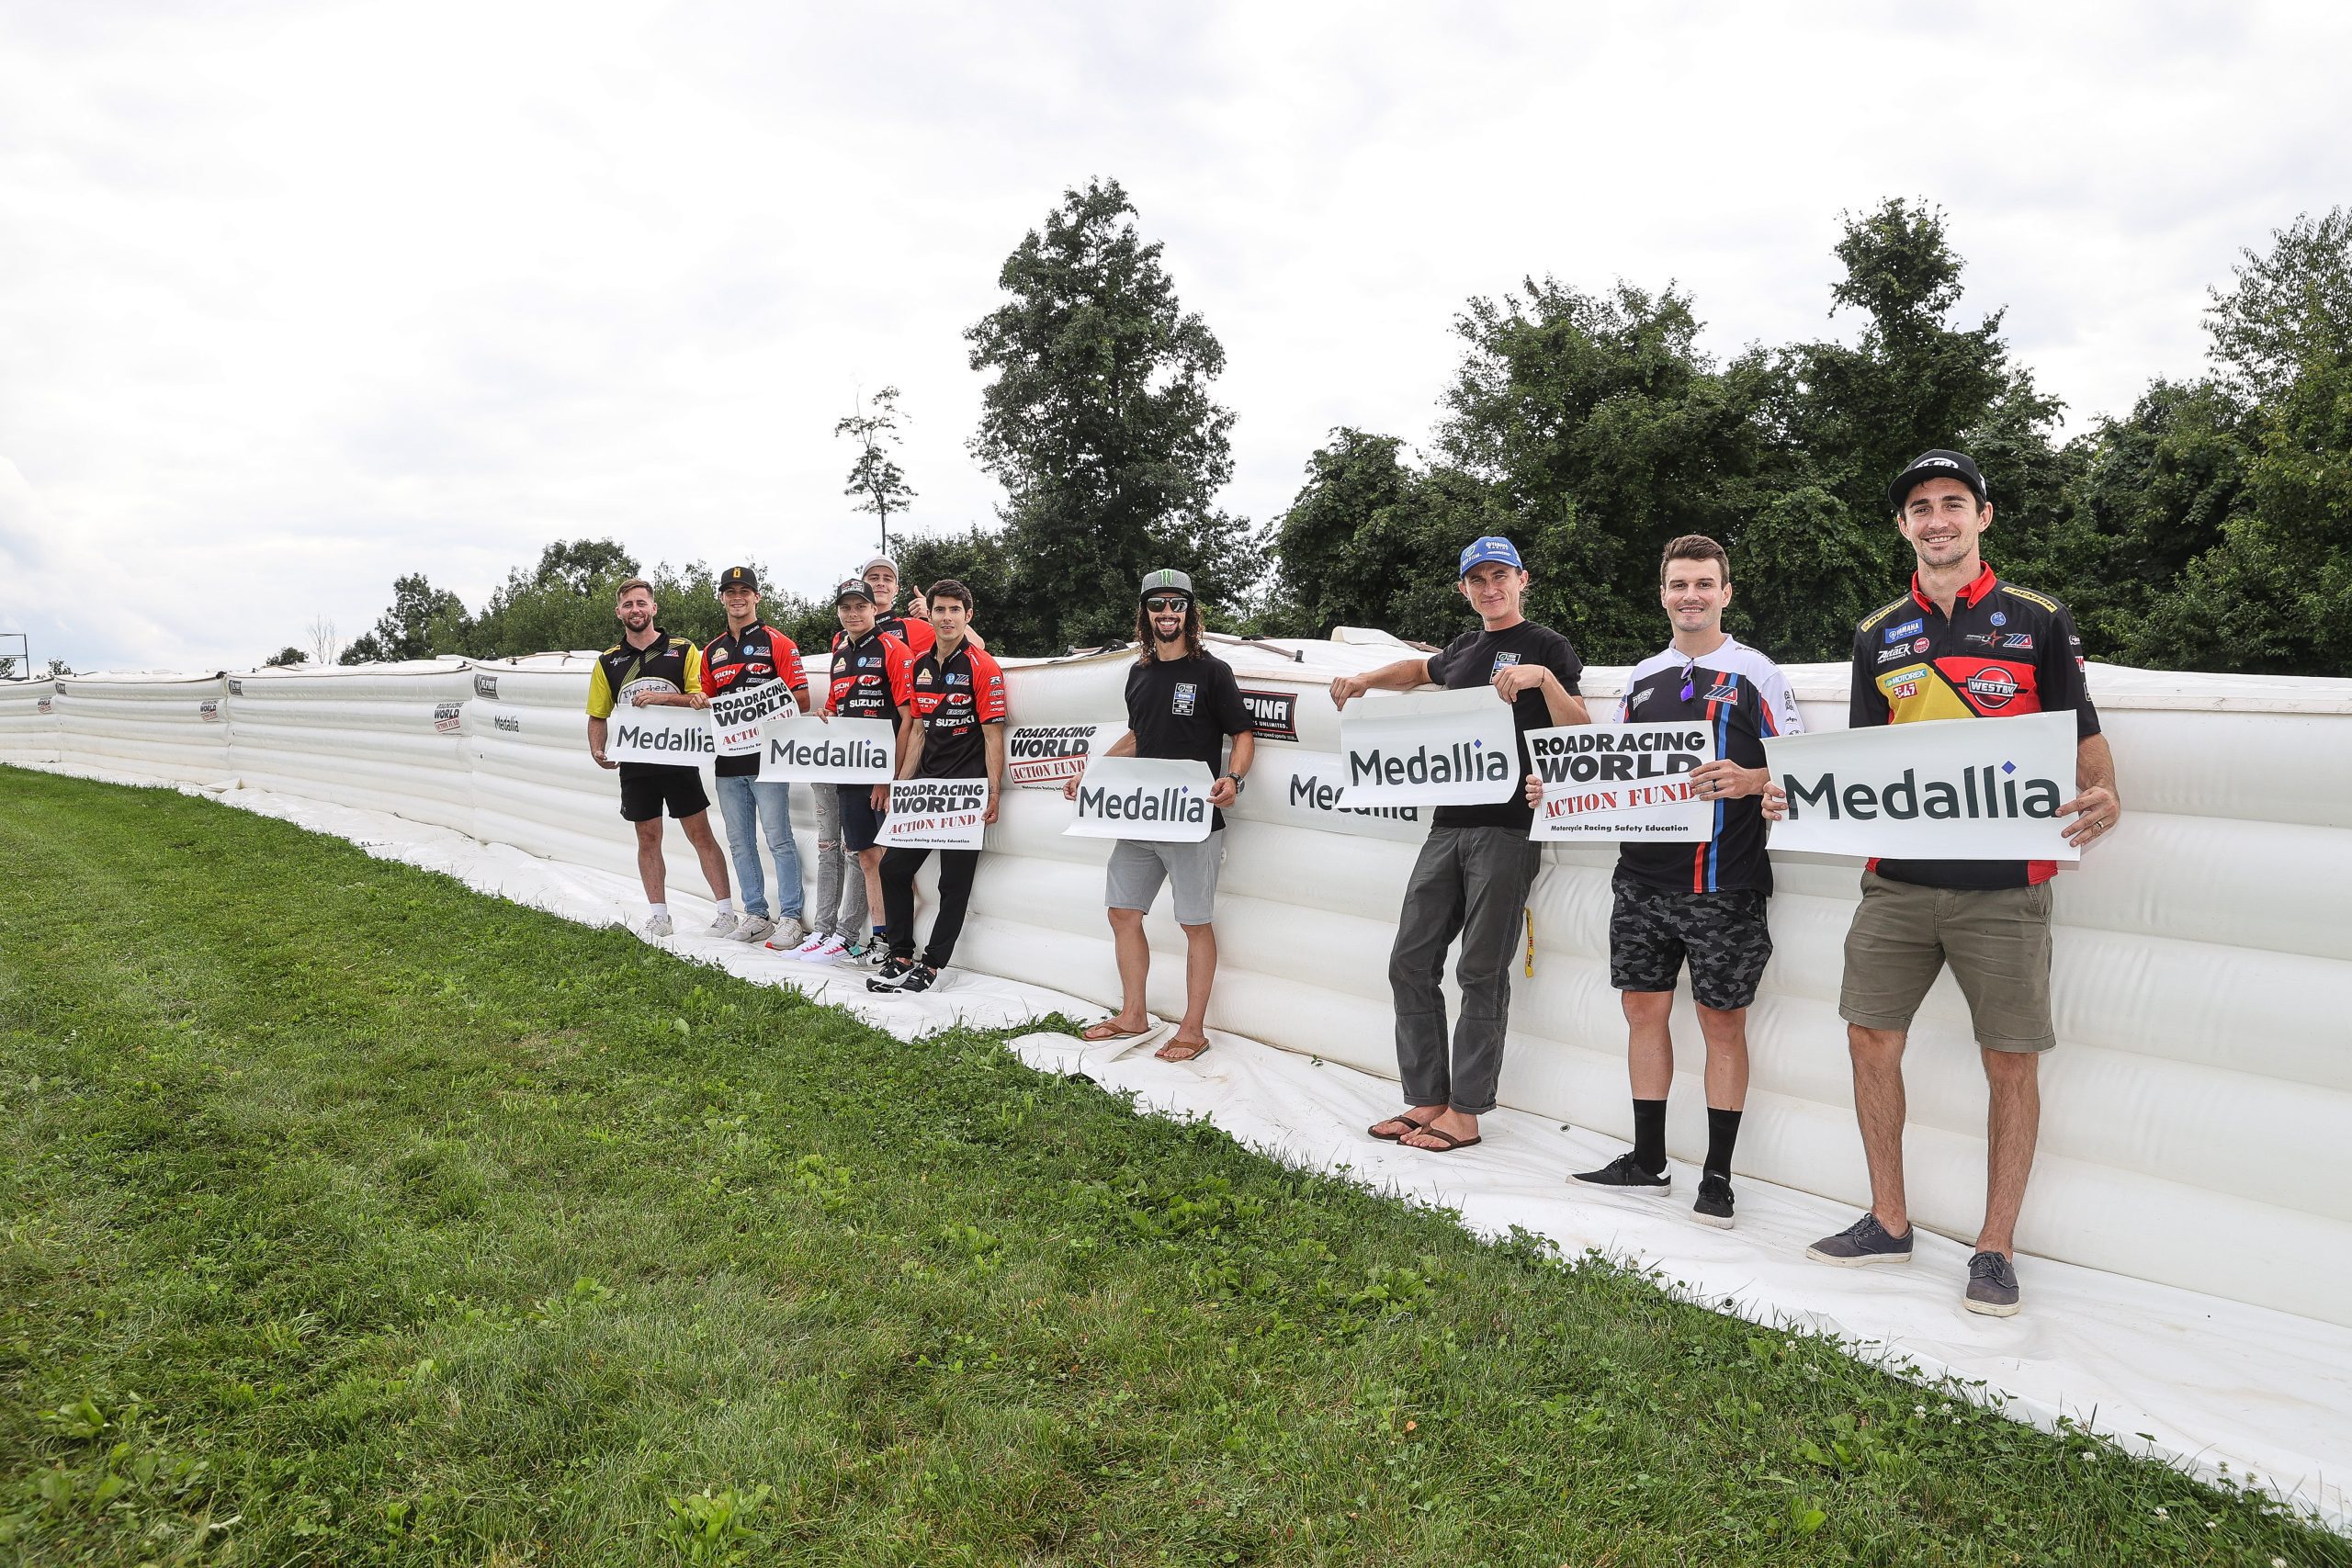 MotoAmerica: WD-40 Specialist Motorcycle Continuing Sponsorship Of Scheibe  Racing Superbike Team At PittRace - Roadracing World Magazine